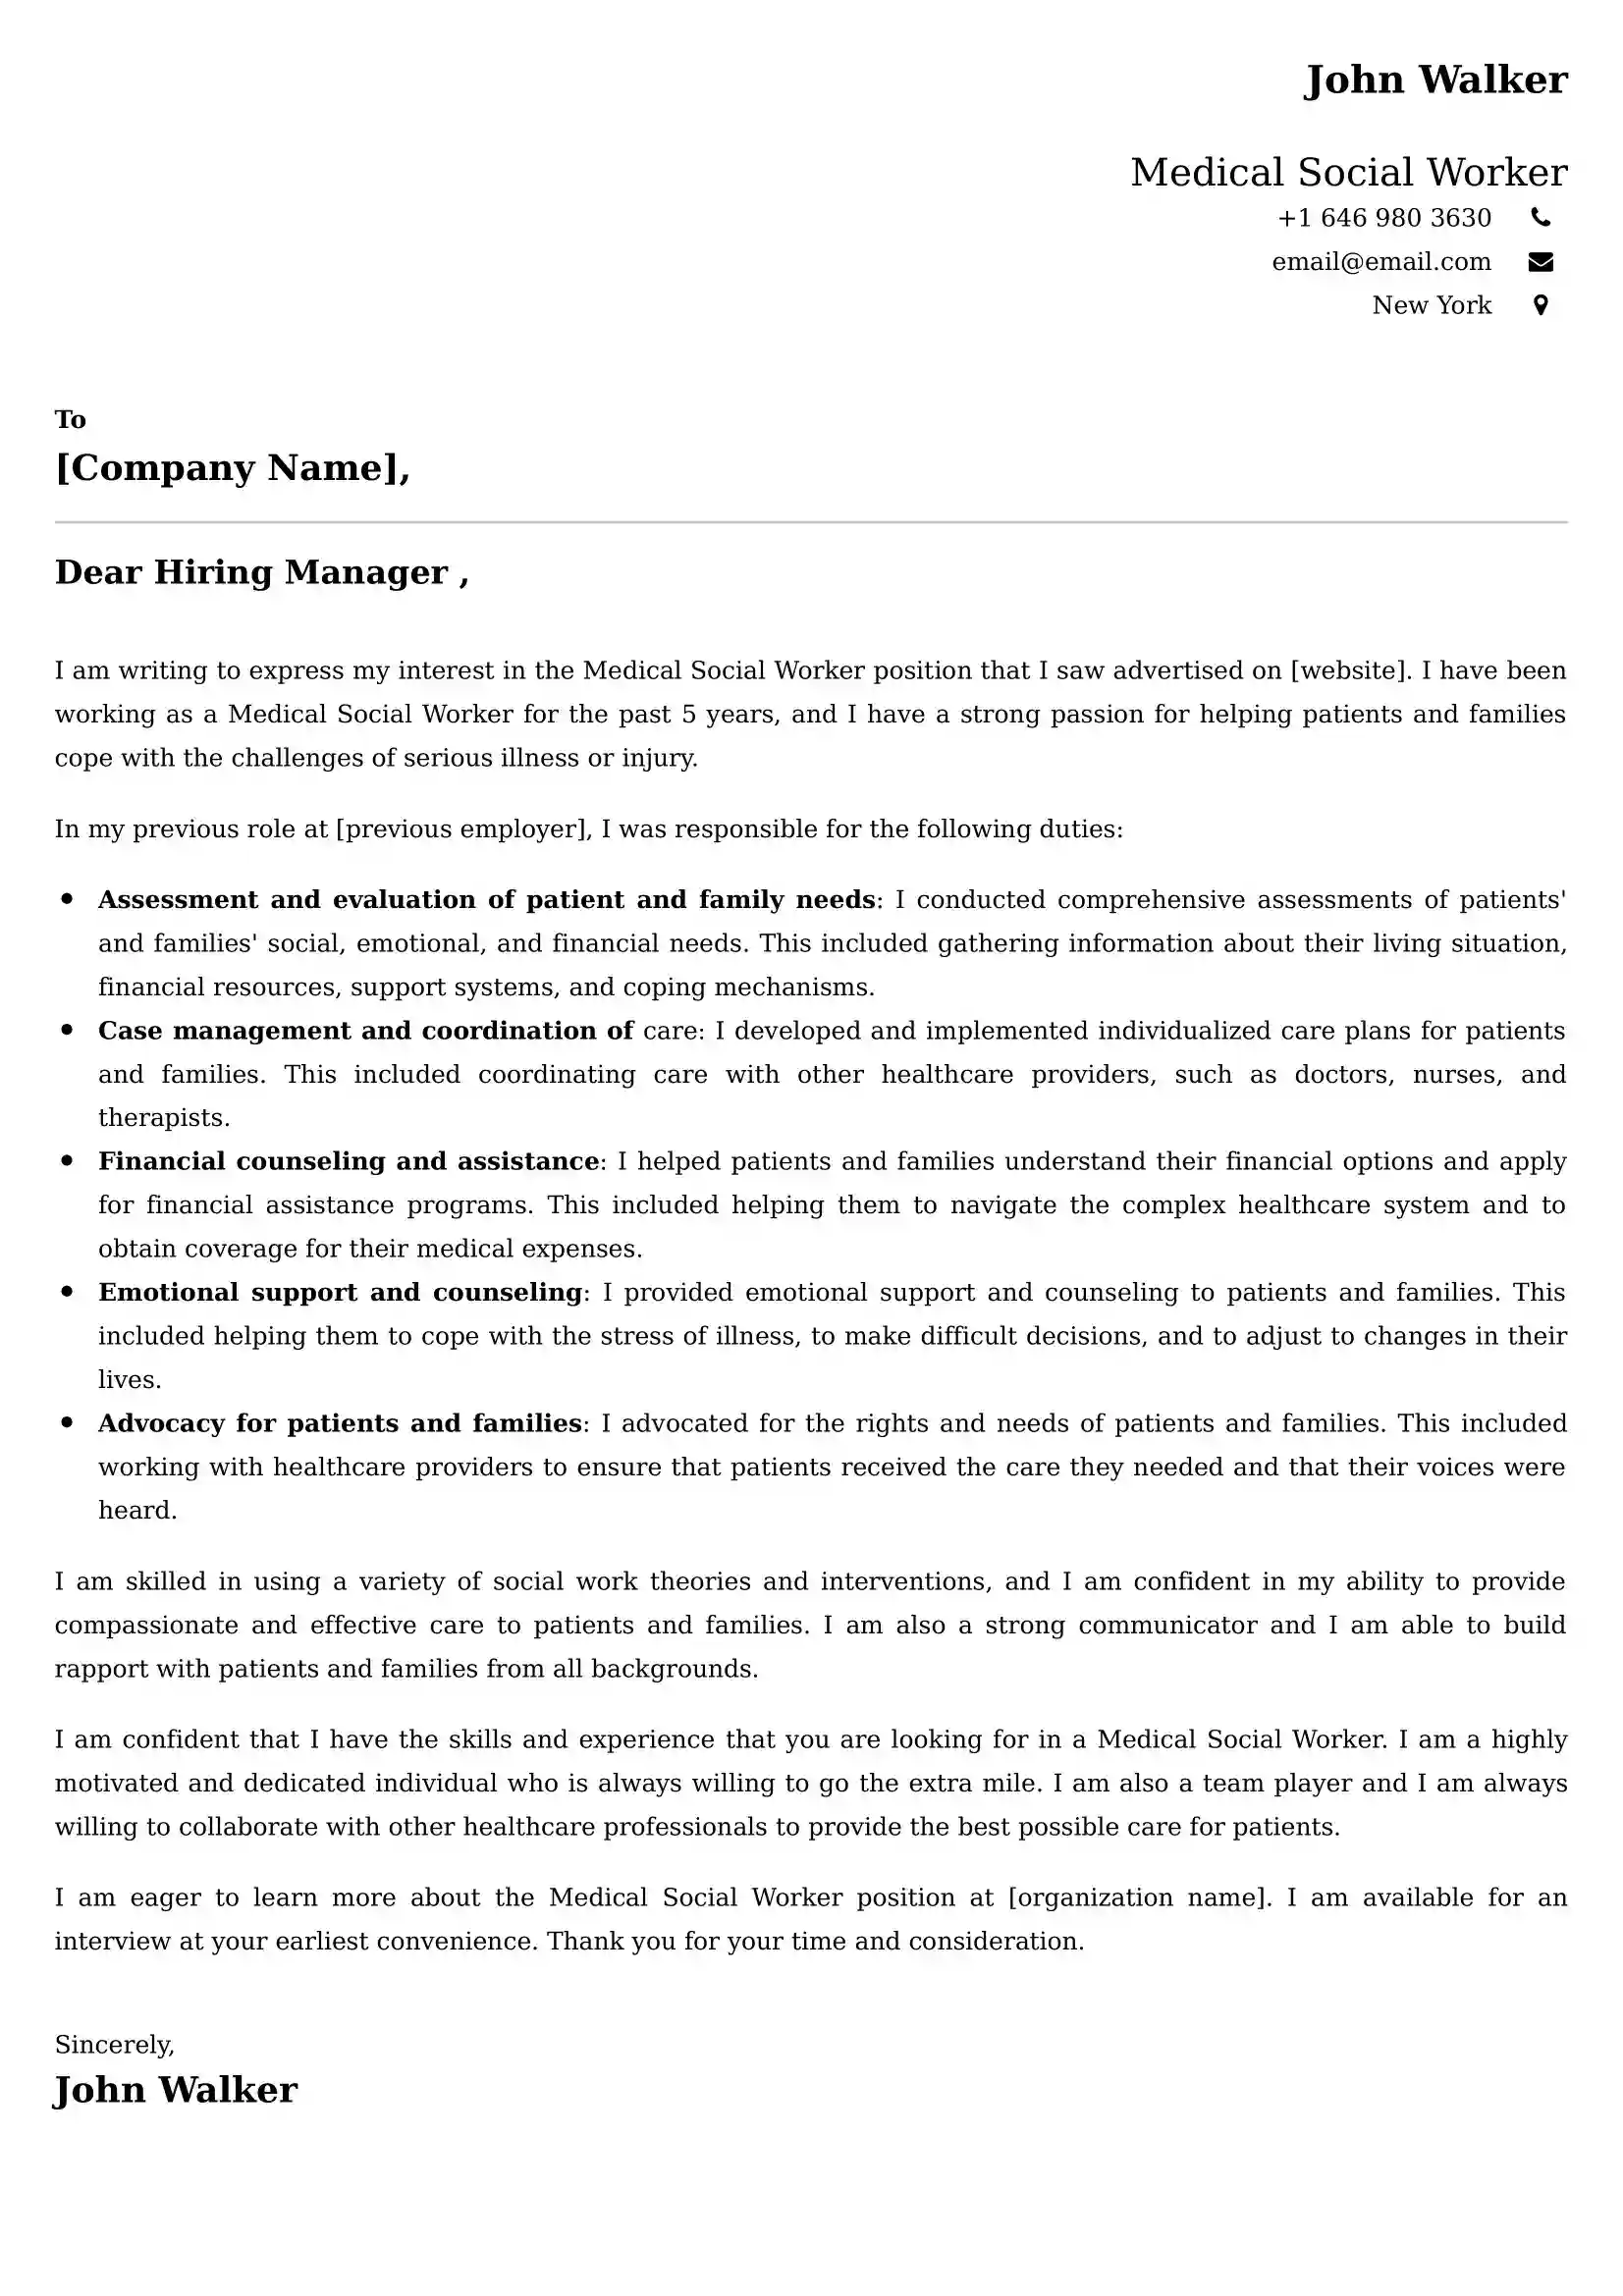 Medical Social Worker Cover Letter Examples UK - Tips and Guide